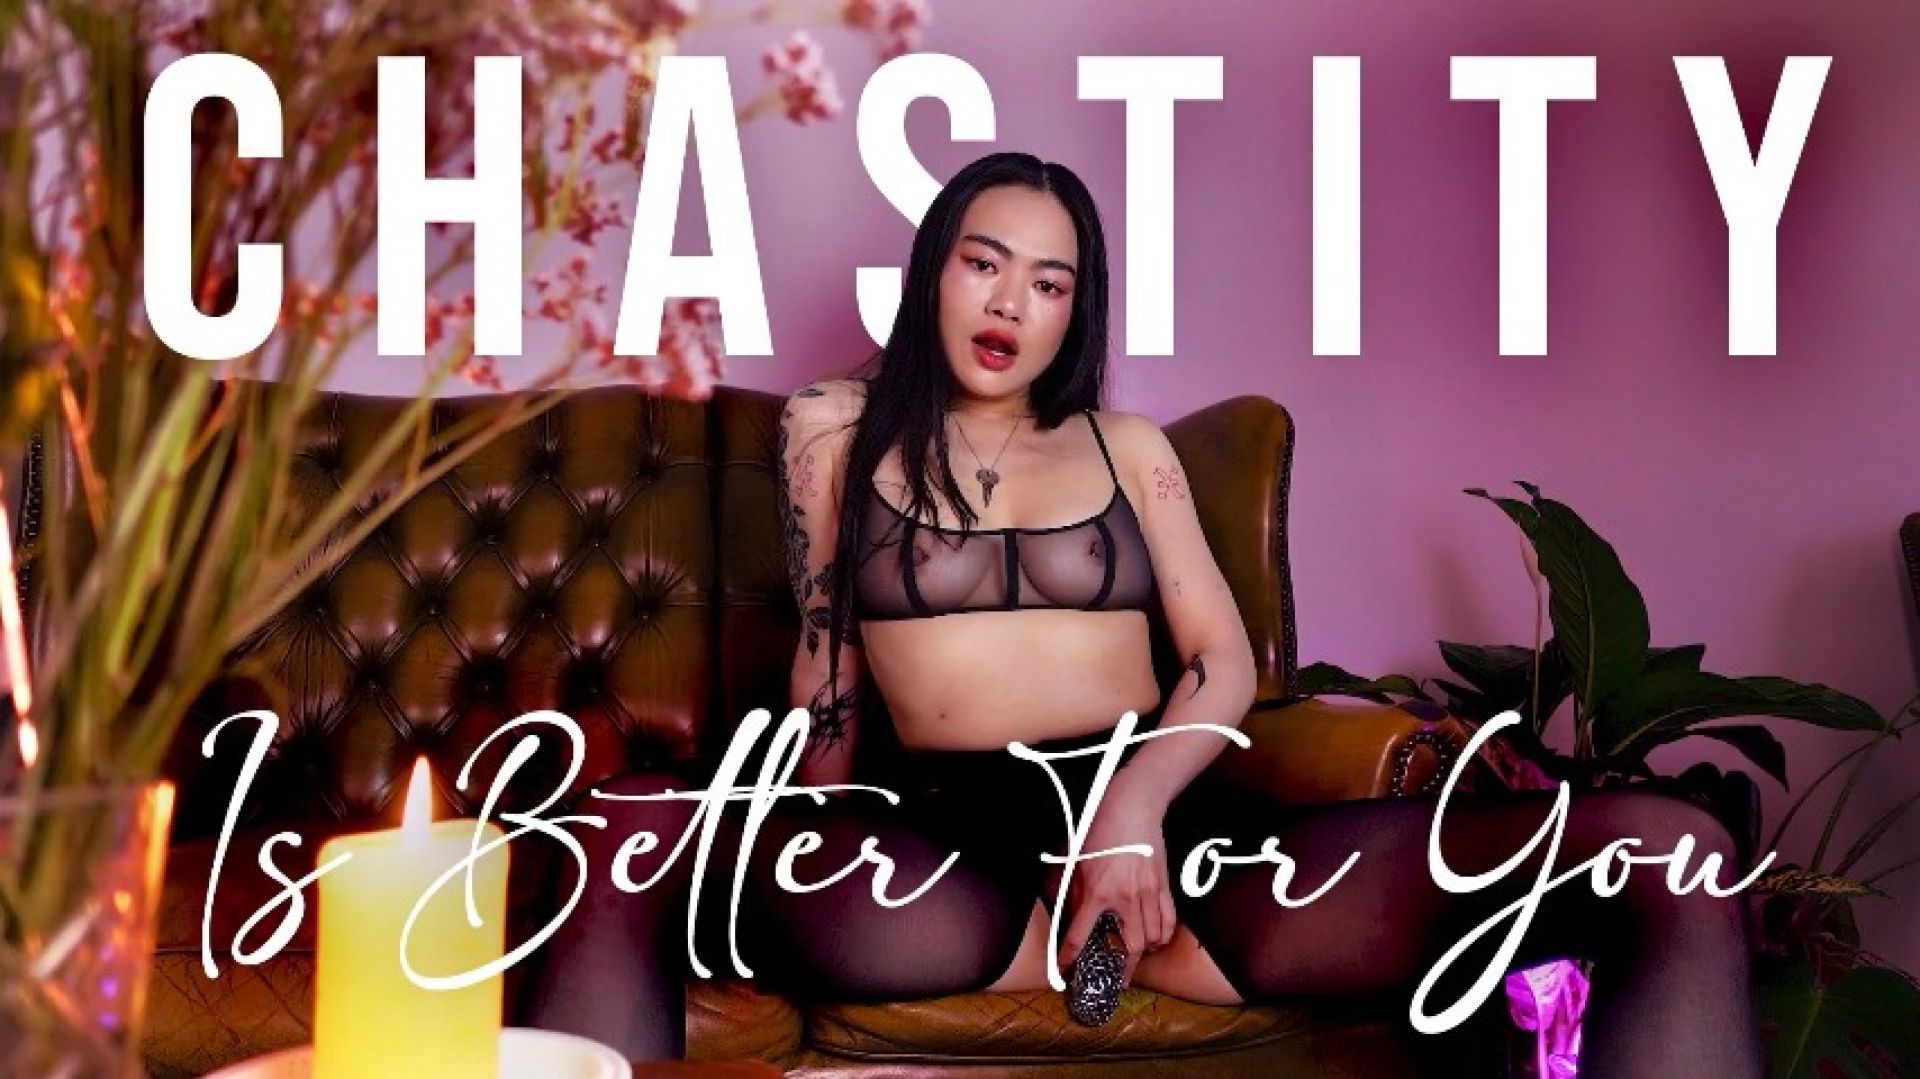 CHASTITY IS BETTER FOR YOU